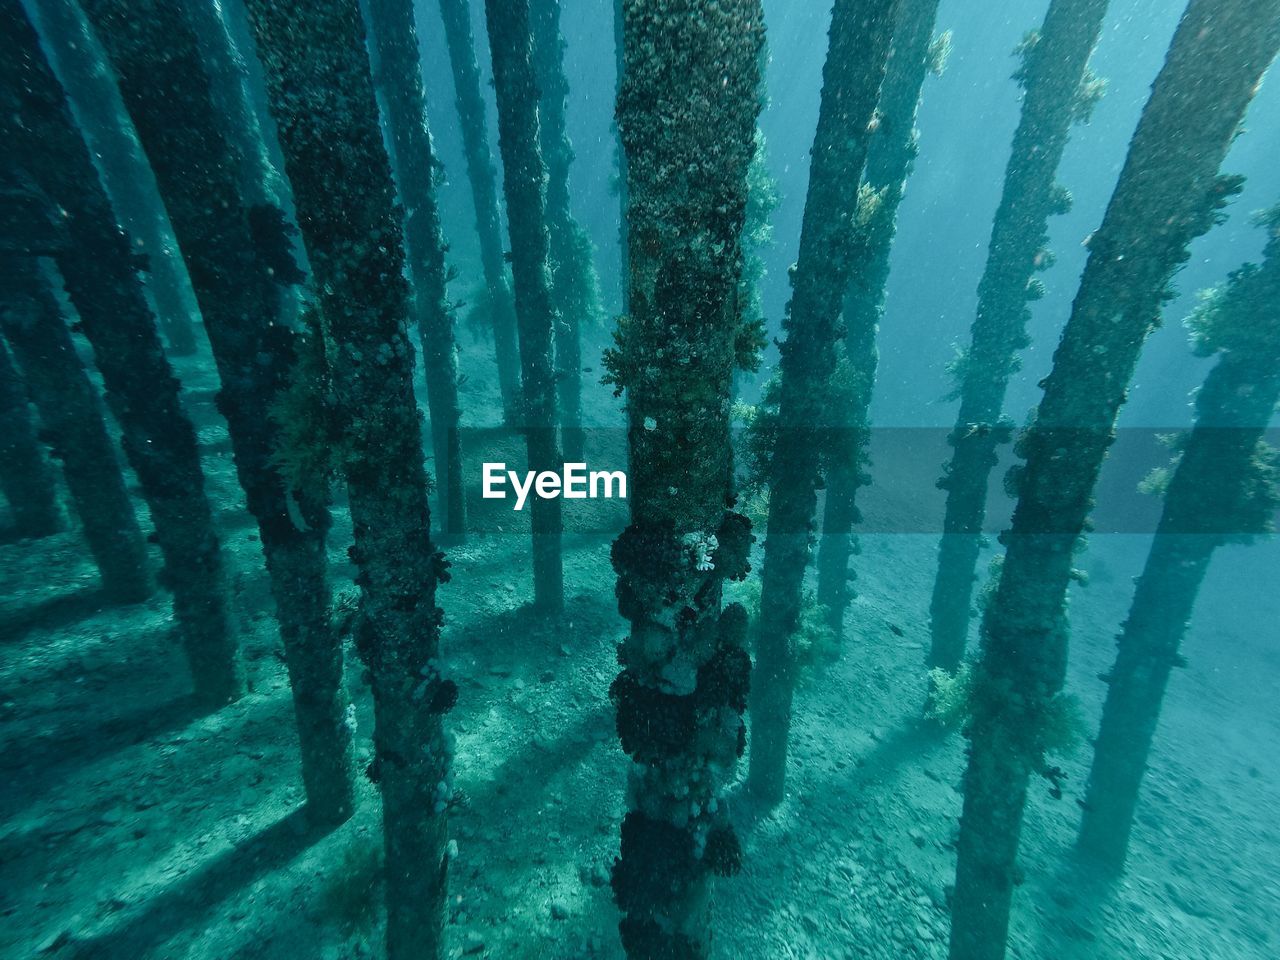 CLOSE-UP OF TREES GROWING BY SEA IN FOREST